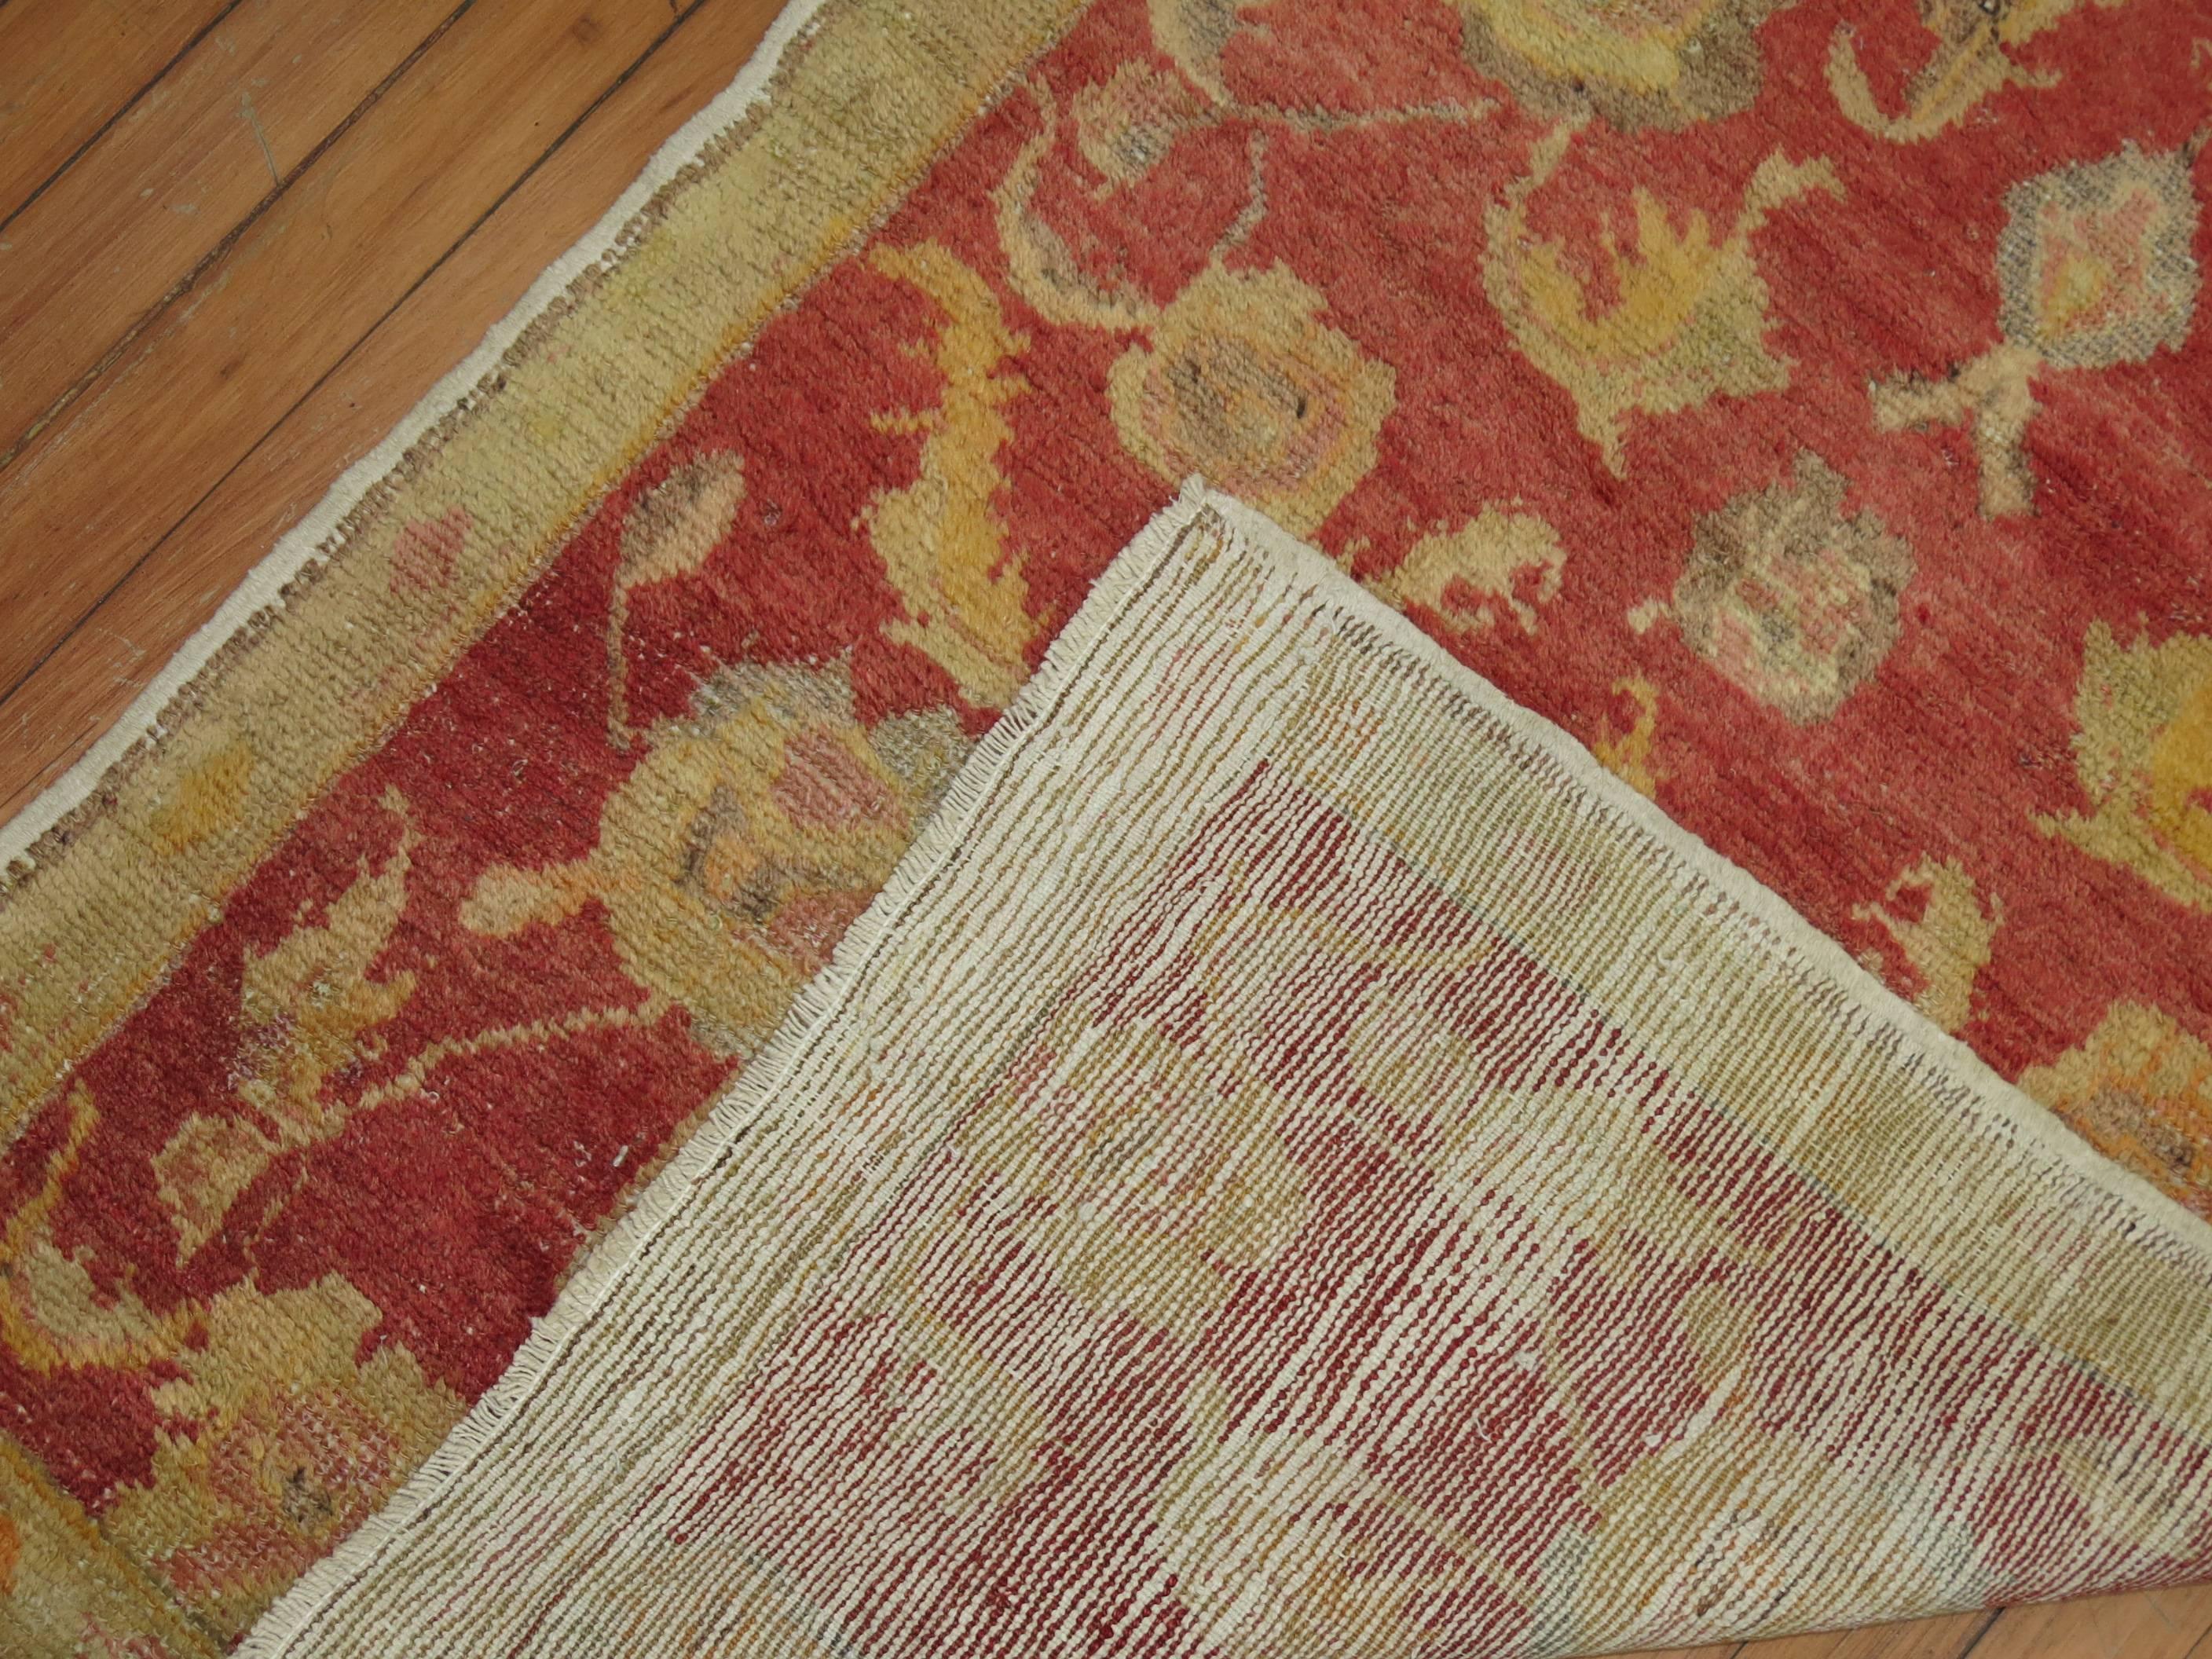 A scatter size vintage Turkish Oushak rug, circa mid-20th century.